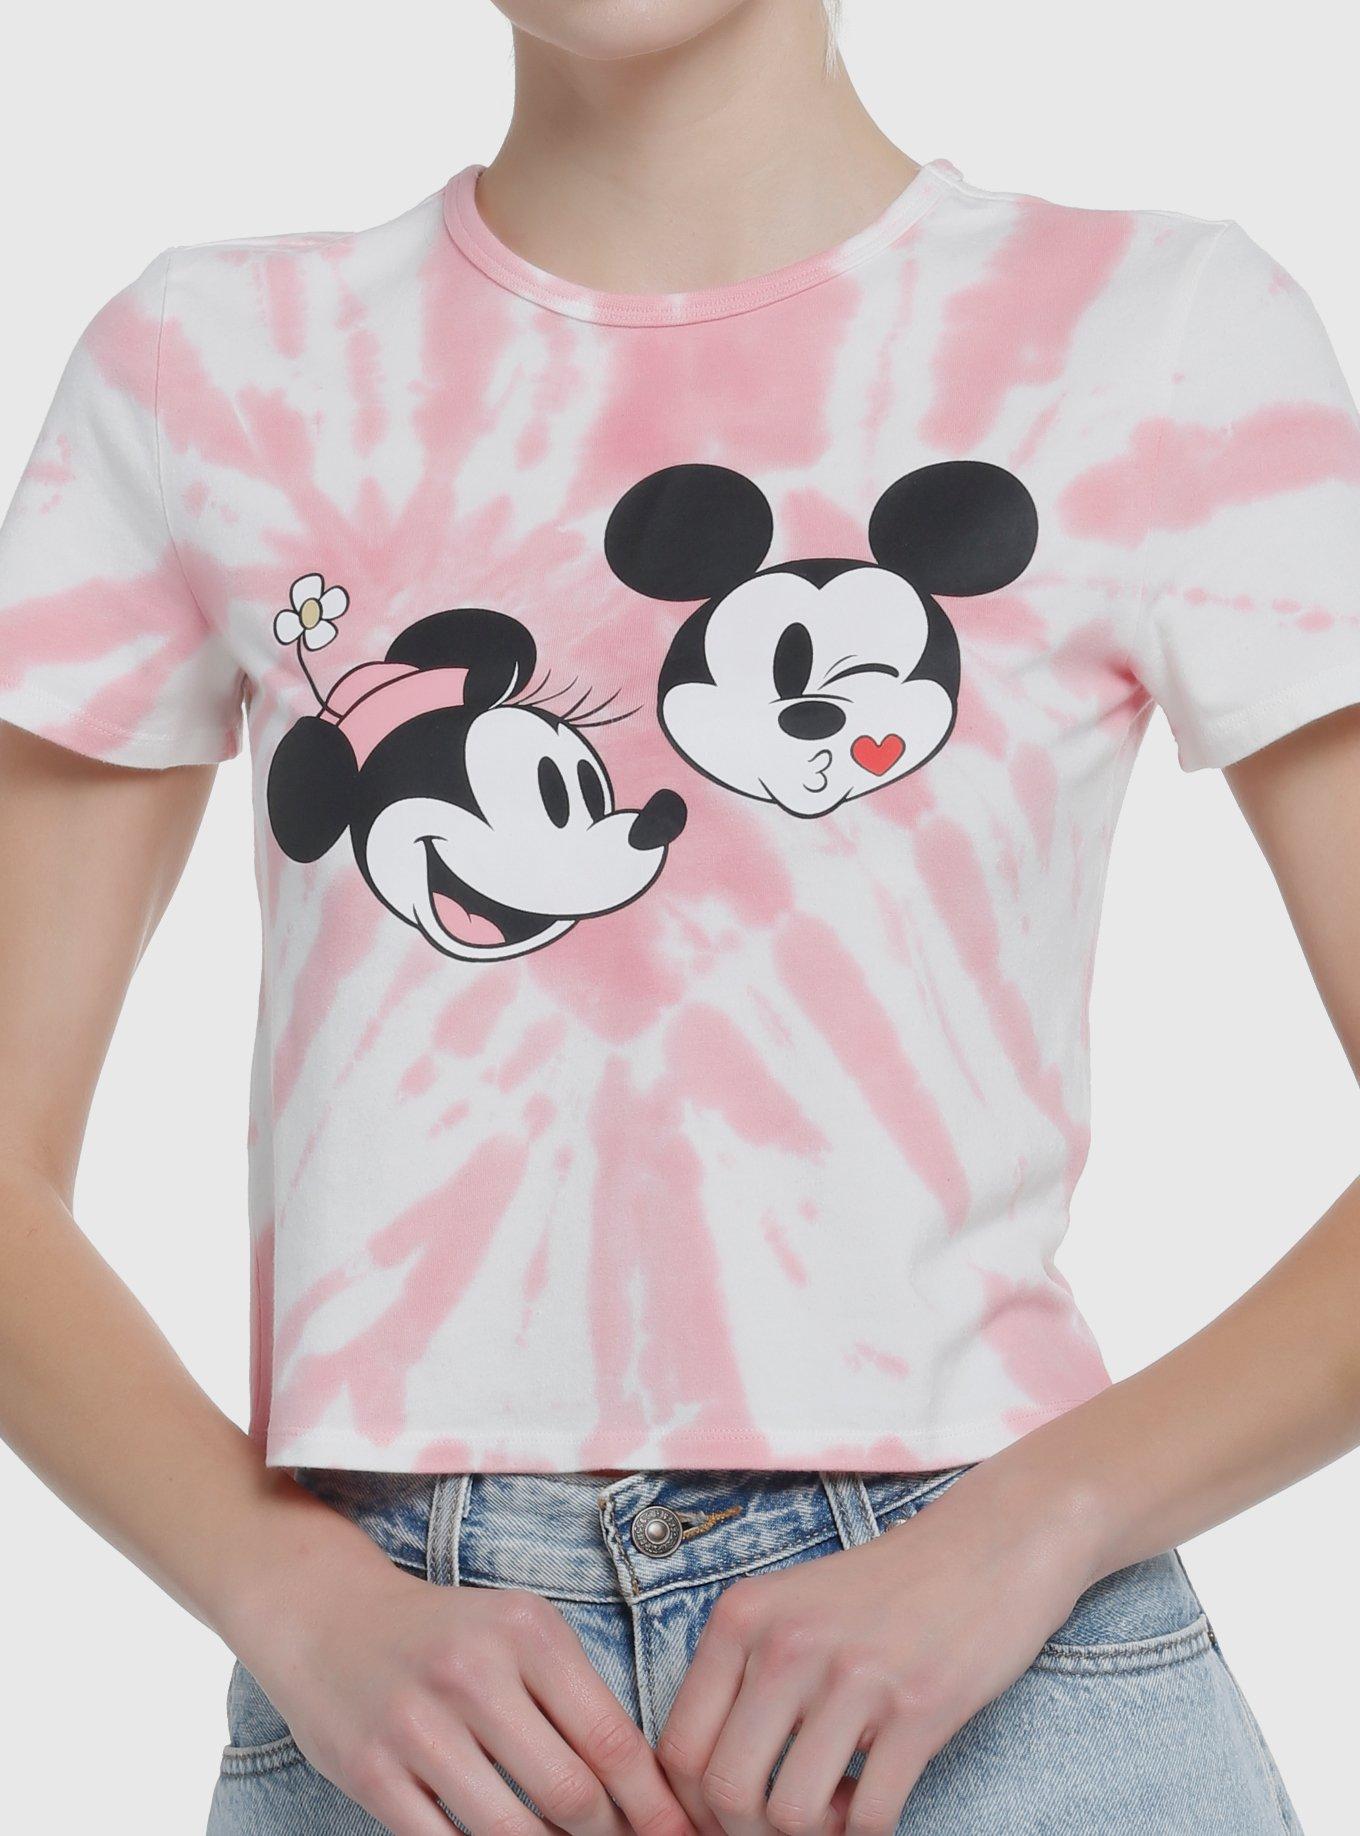 DISNEY Mickey And Minnie Mouse Women's Football Style Black T-Shirt